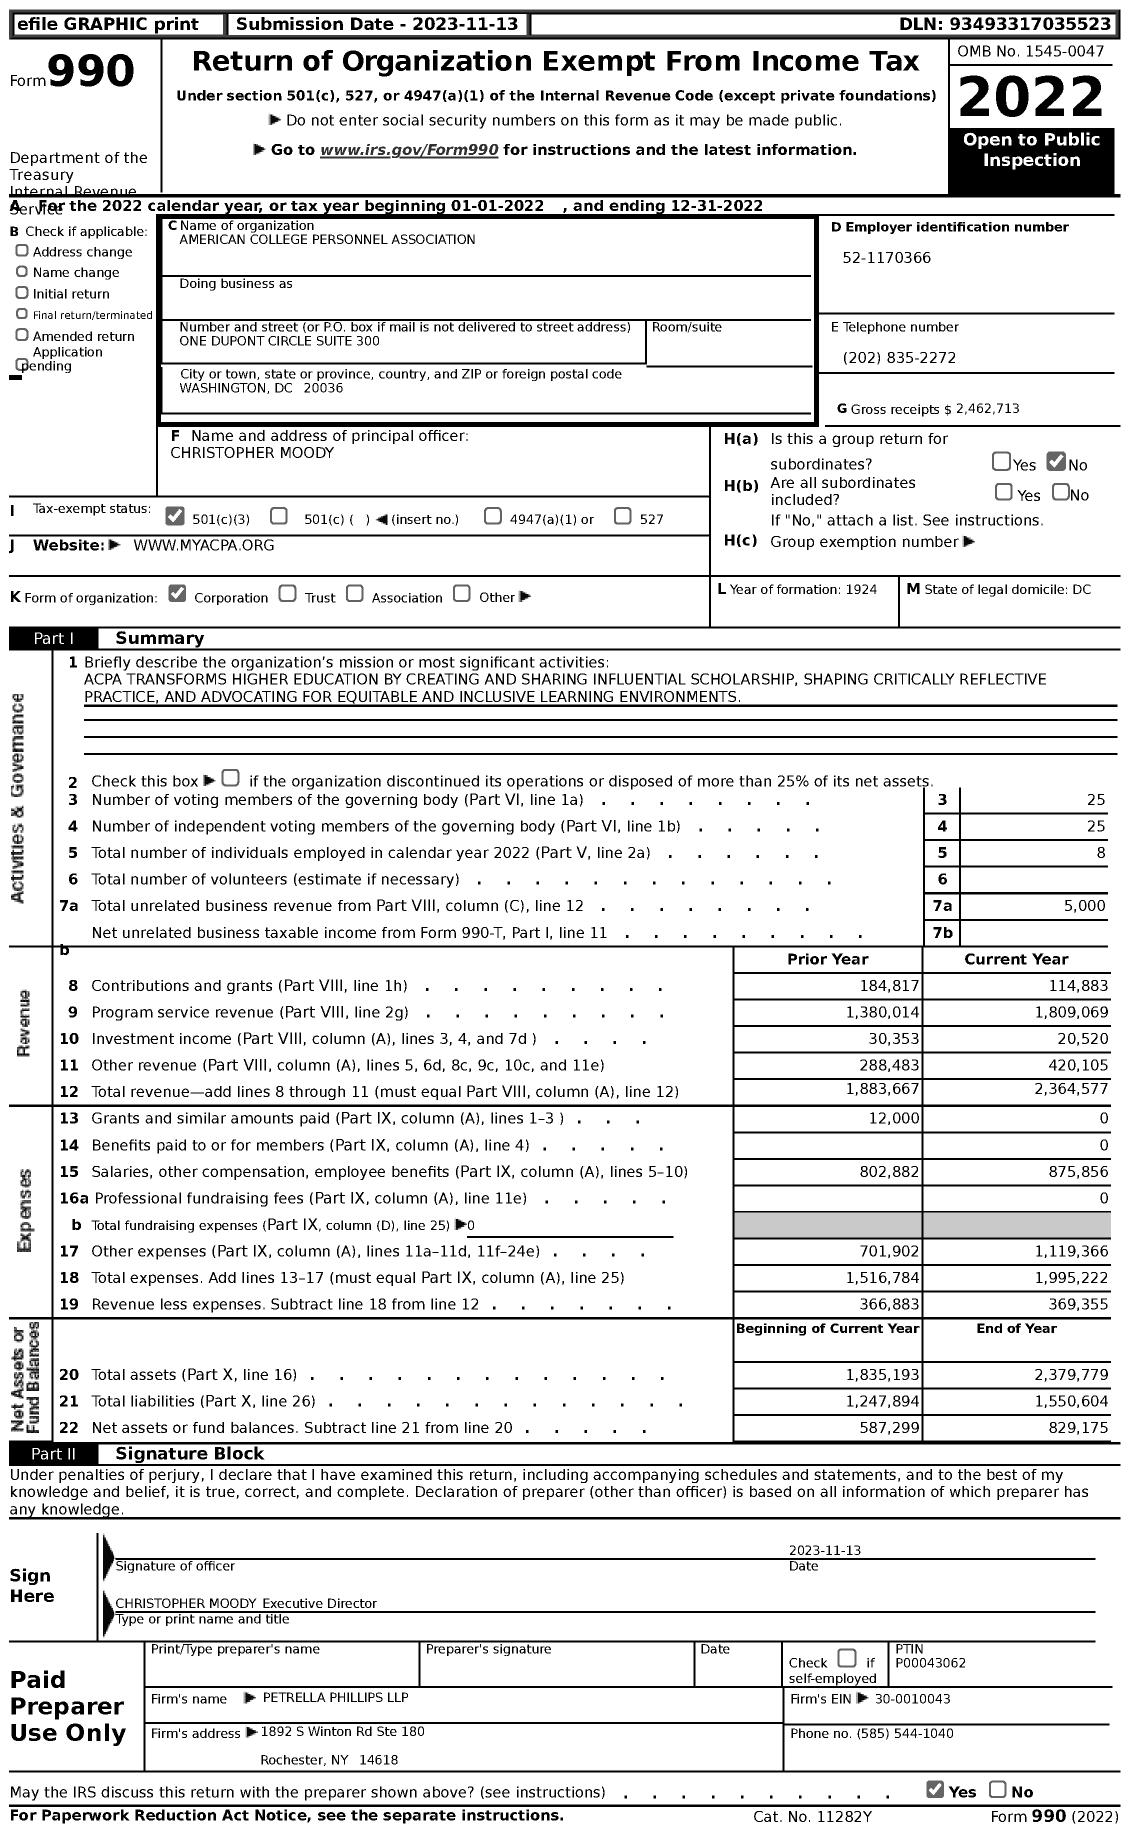 Image of first page of 2022 Form 990 for American College Personnel Association